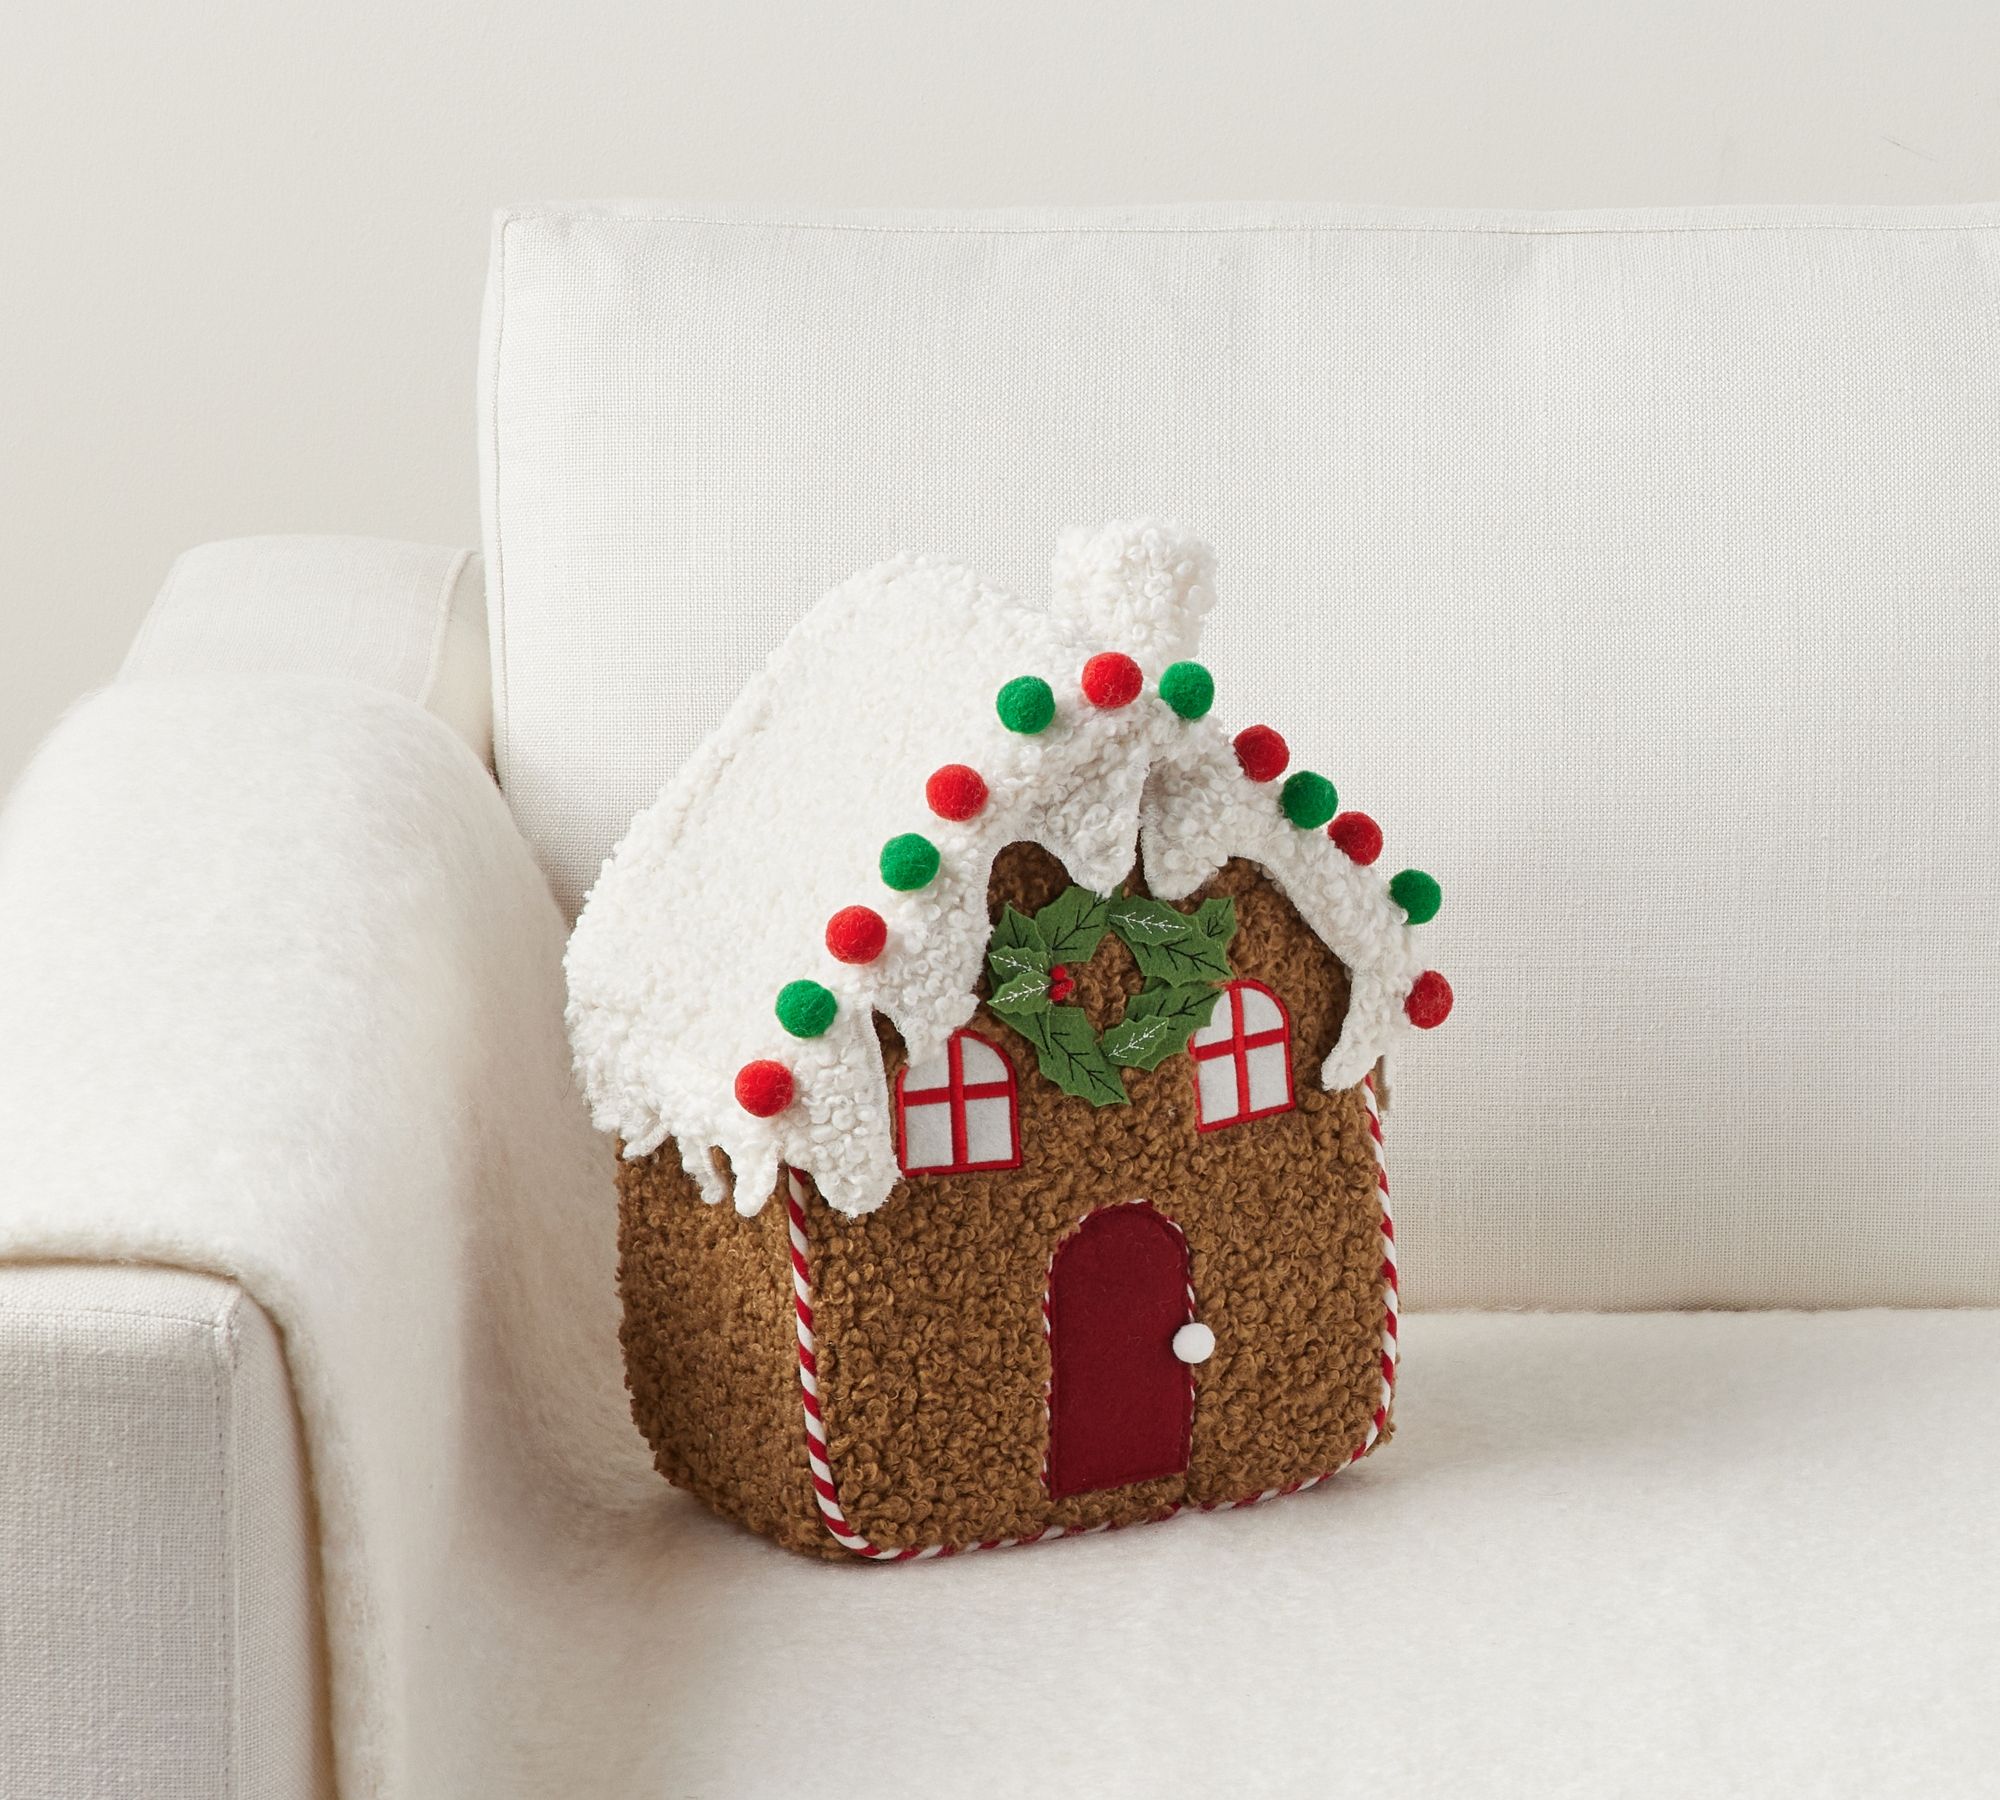 Decorated Gingerbread House Shaped Pillow